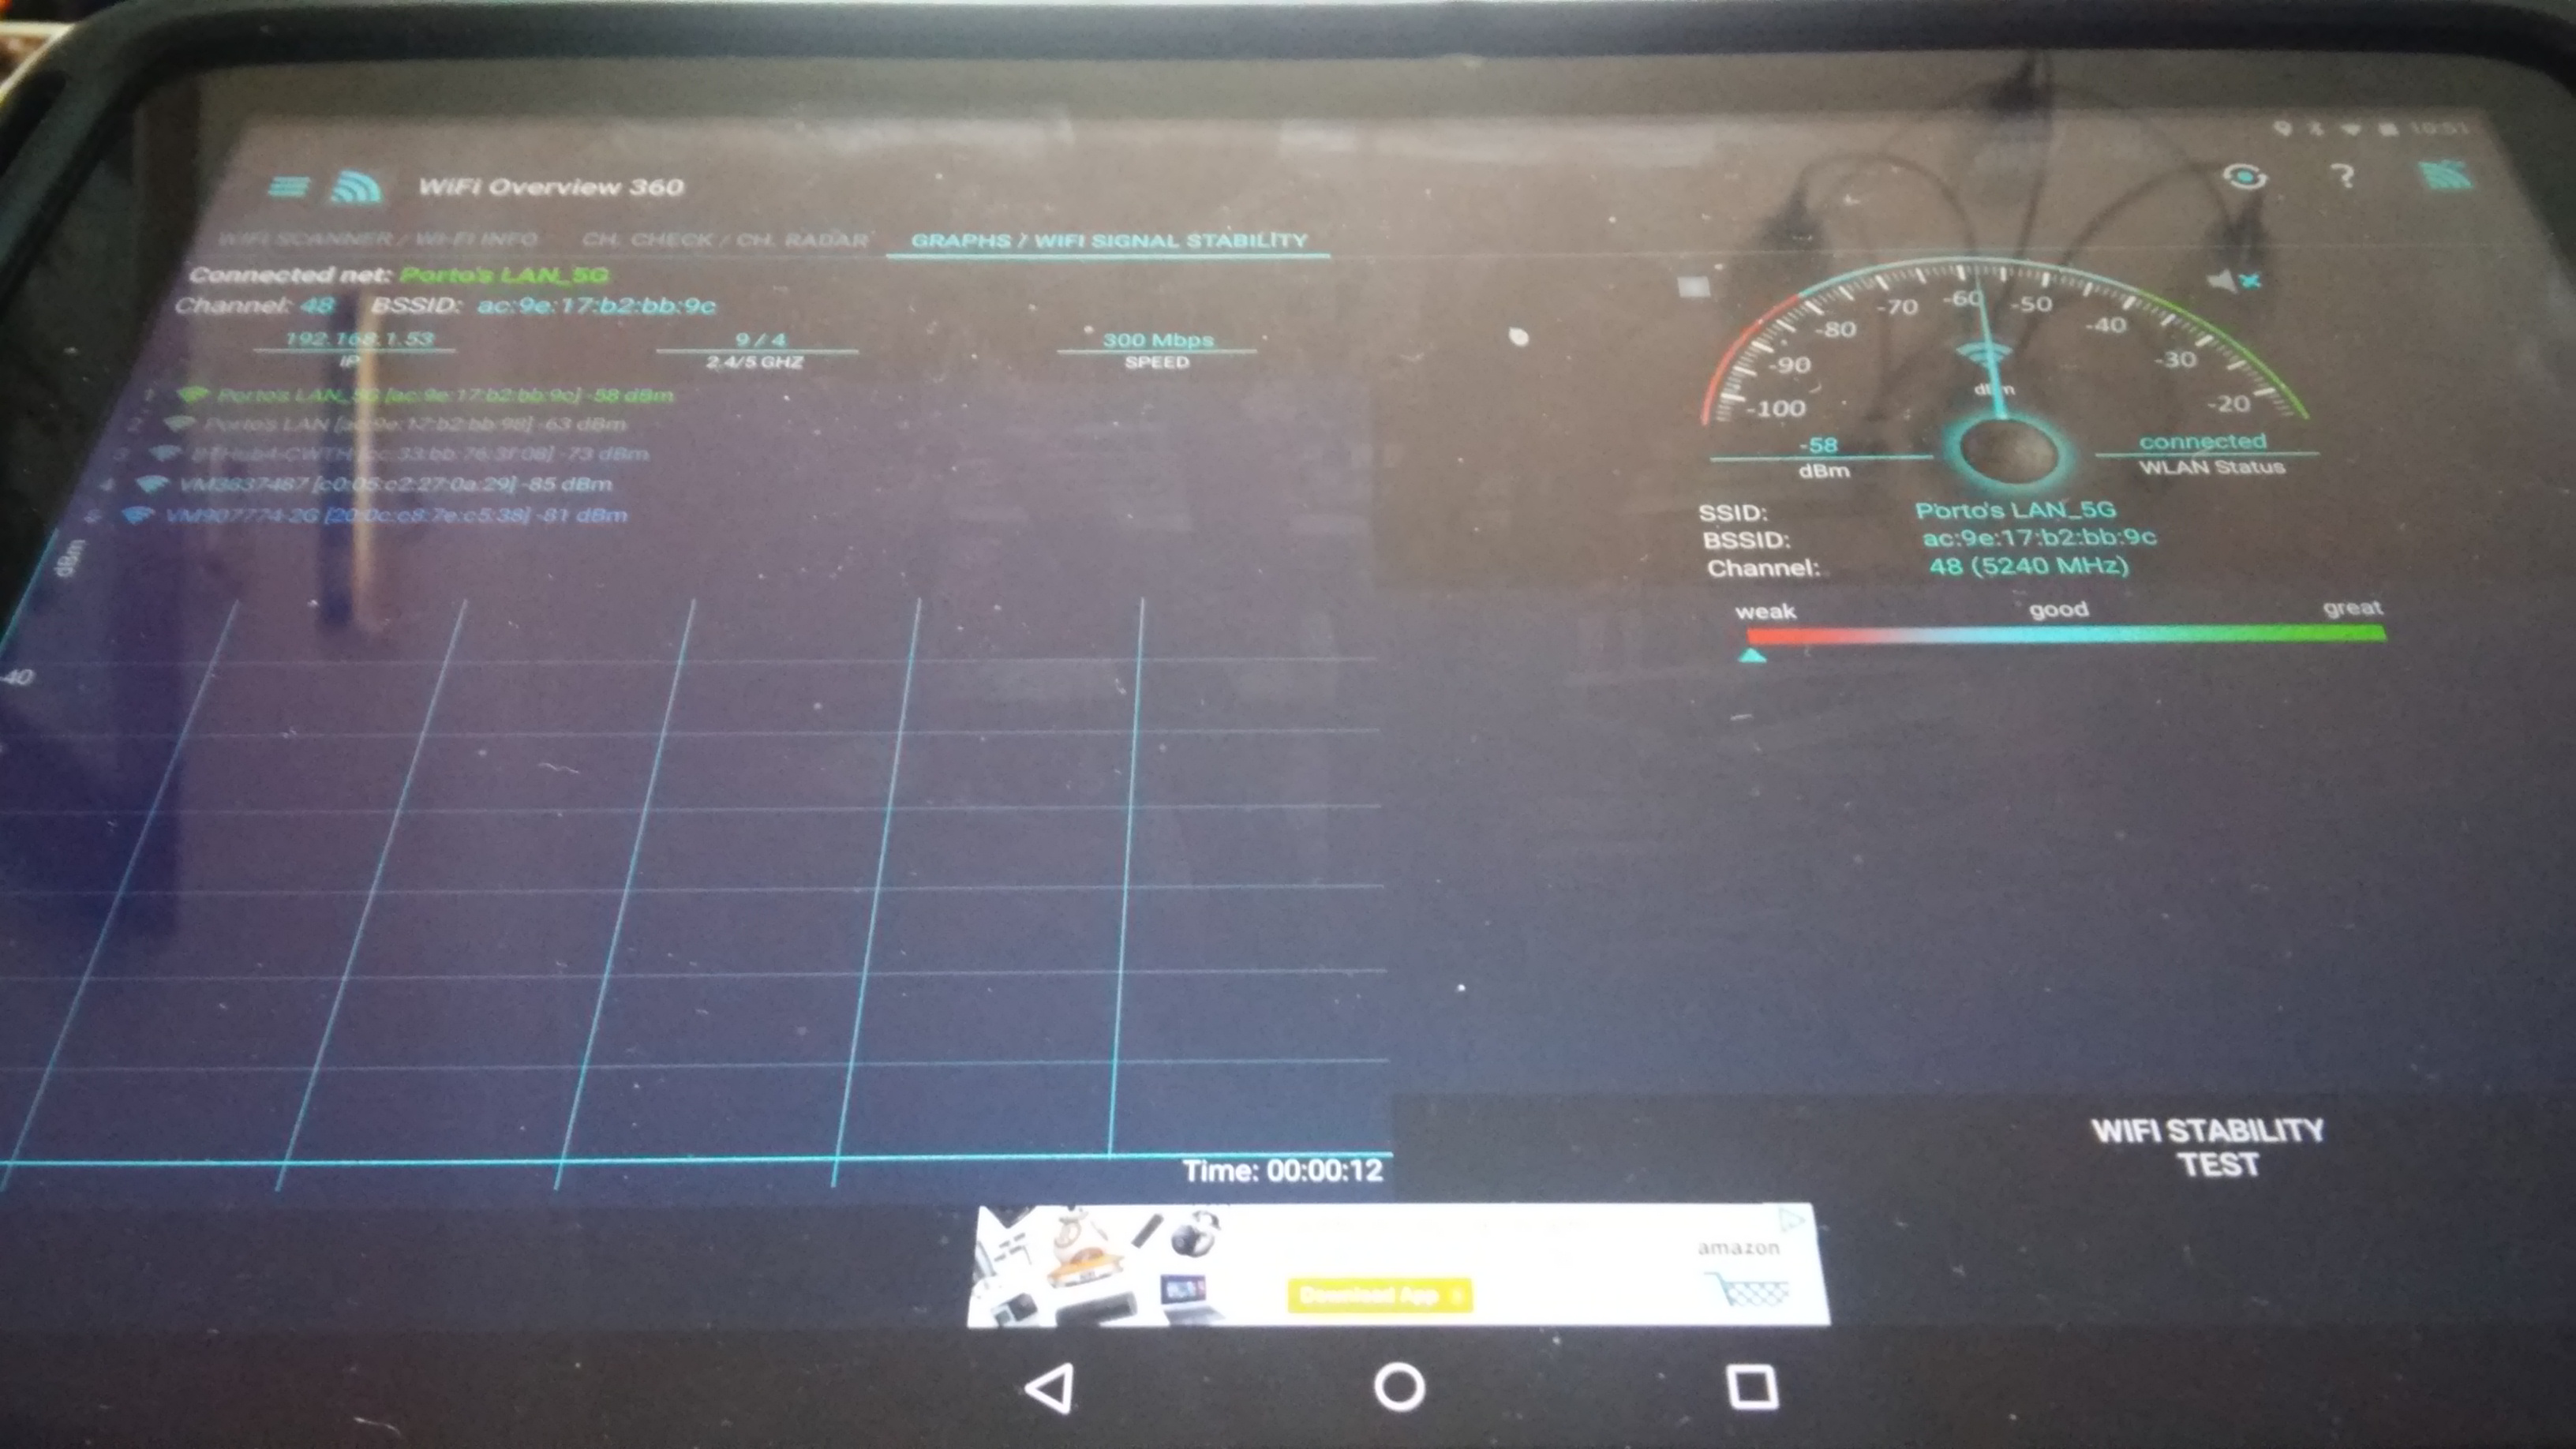 Wifi Overview 360 on Tablet. Own work